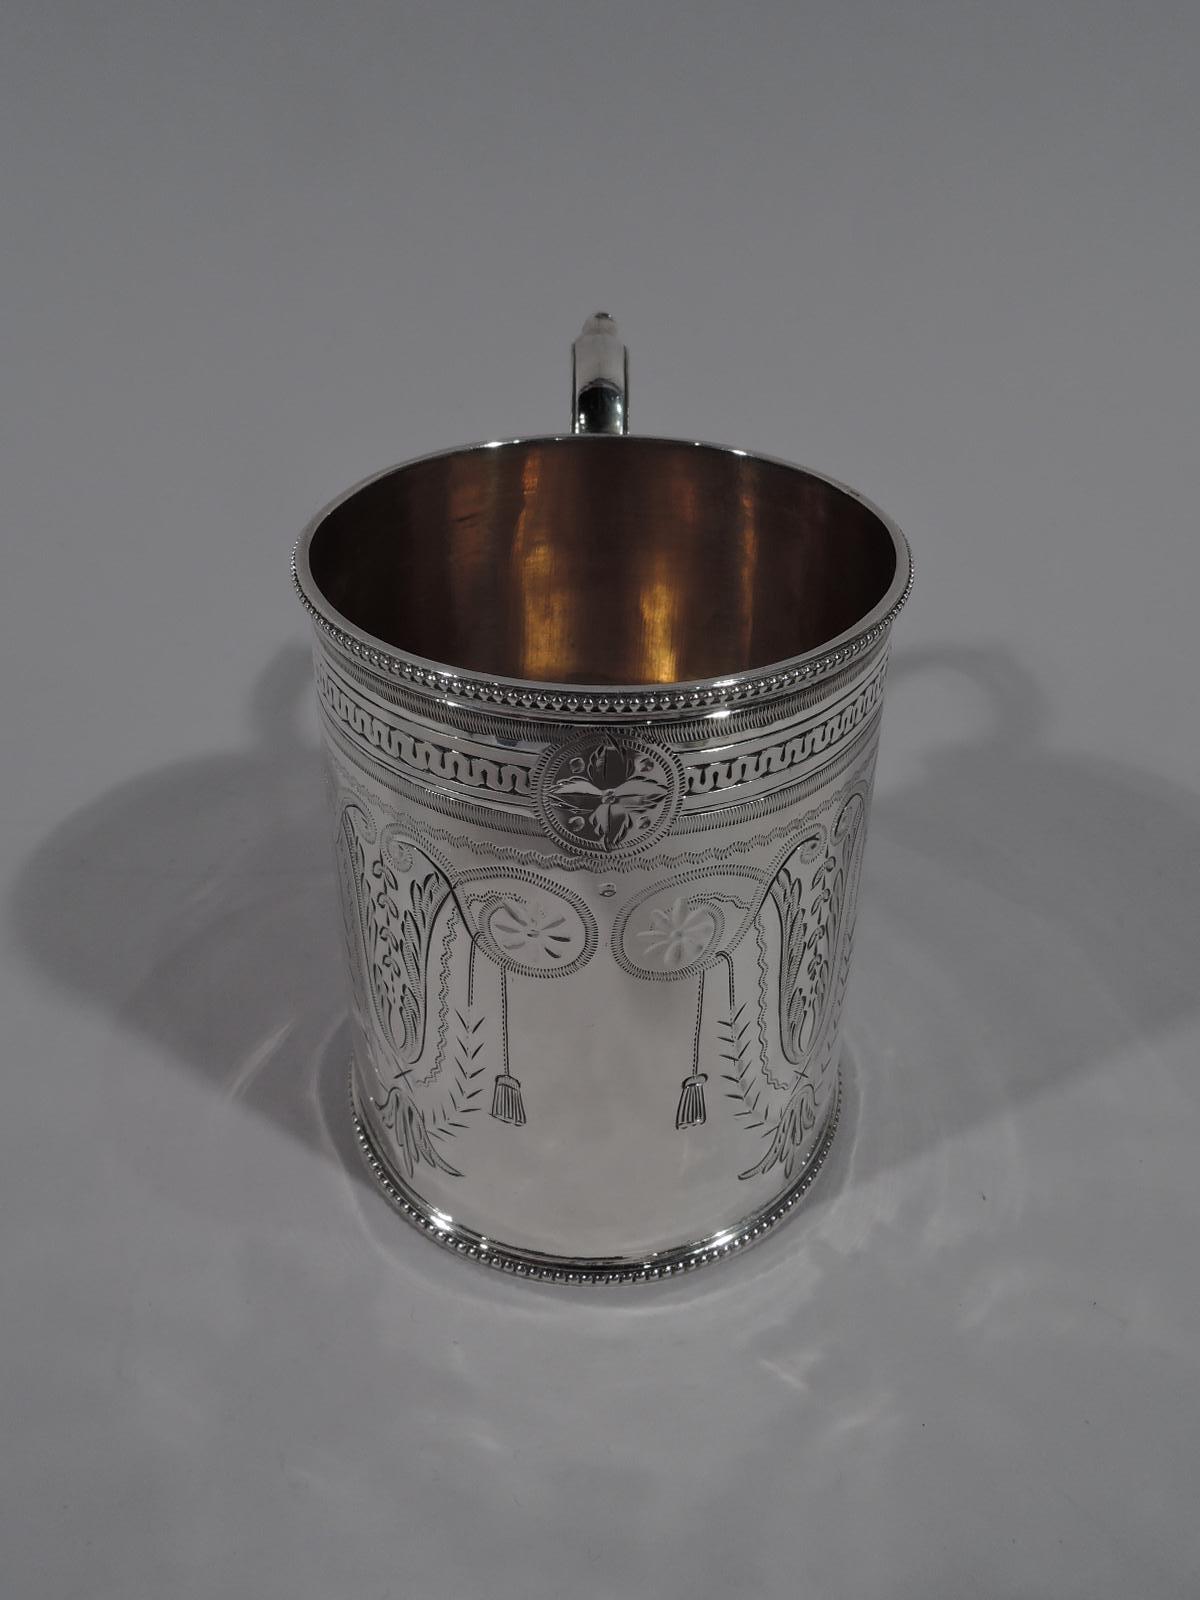 Victorian Aesthetic sterling silver baby cup. Made by Horace Woodward in Birmingham in 1879. Straight sides with capped and beaded S-scroll handle and beaded rims. Engraved stylized ornament with scrolls, leaves, paterae, and pendant flower heads. A